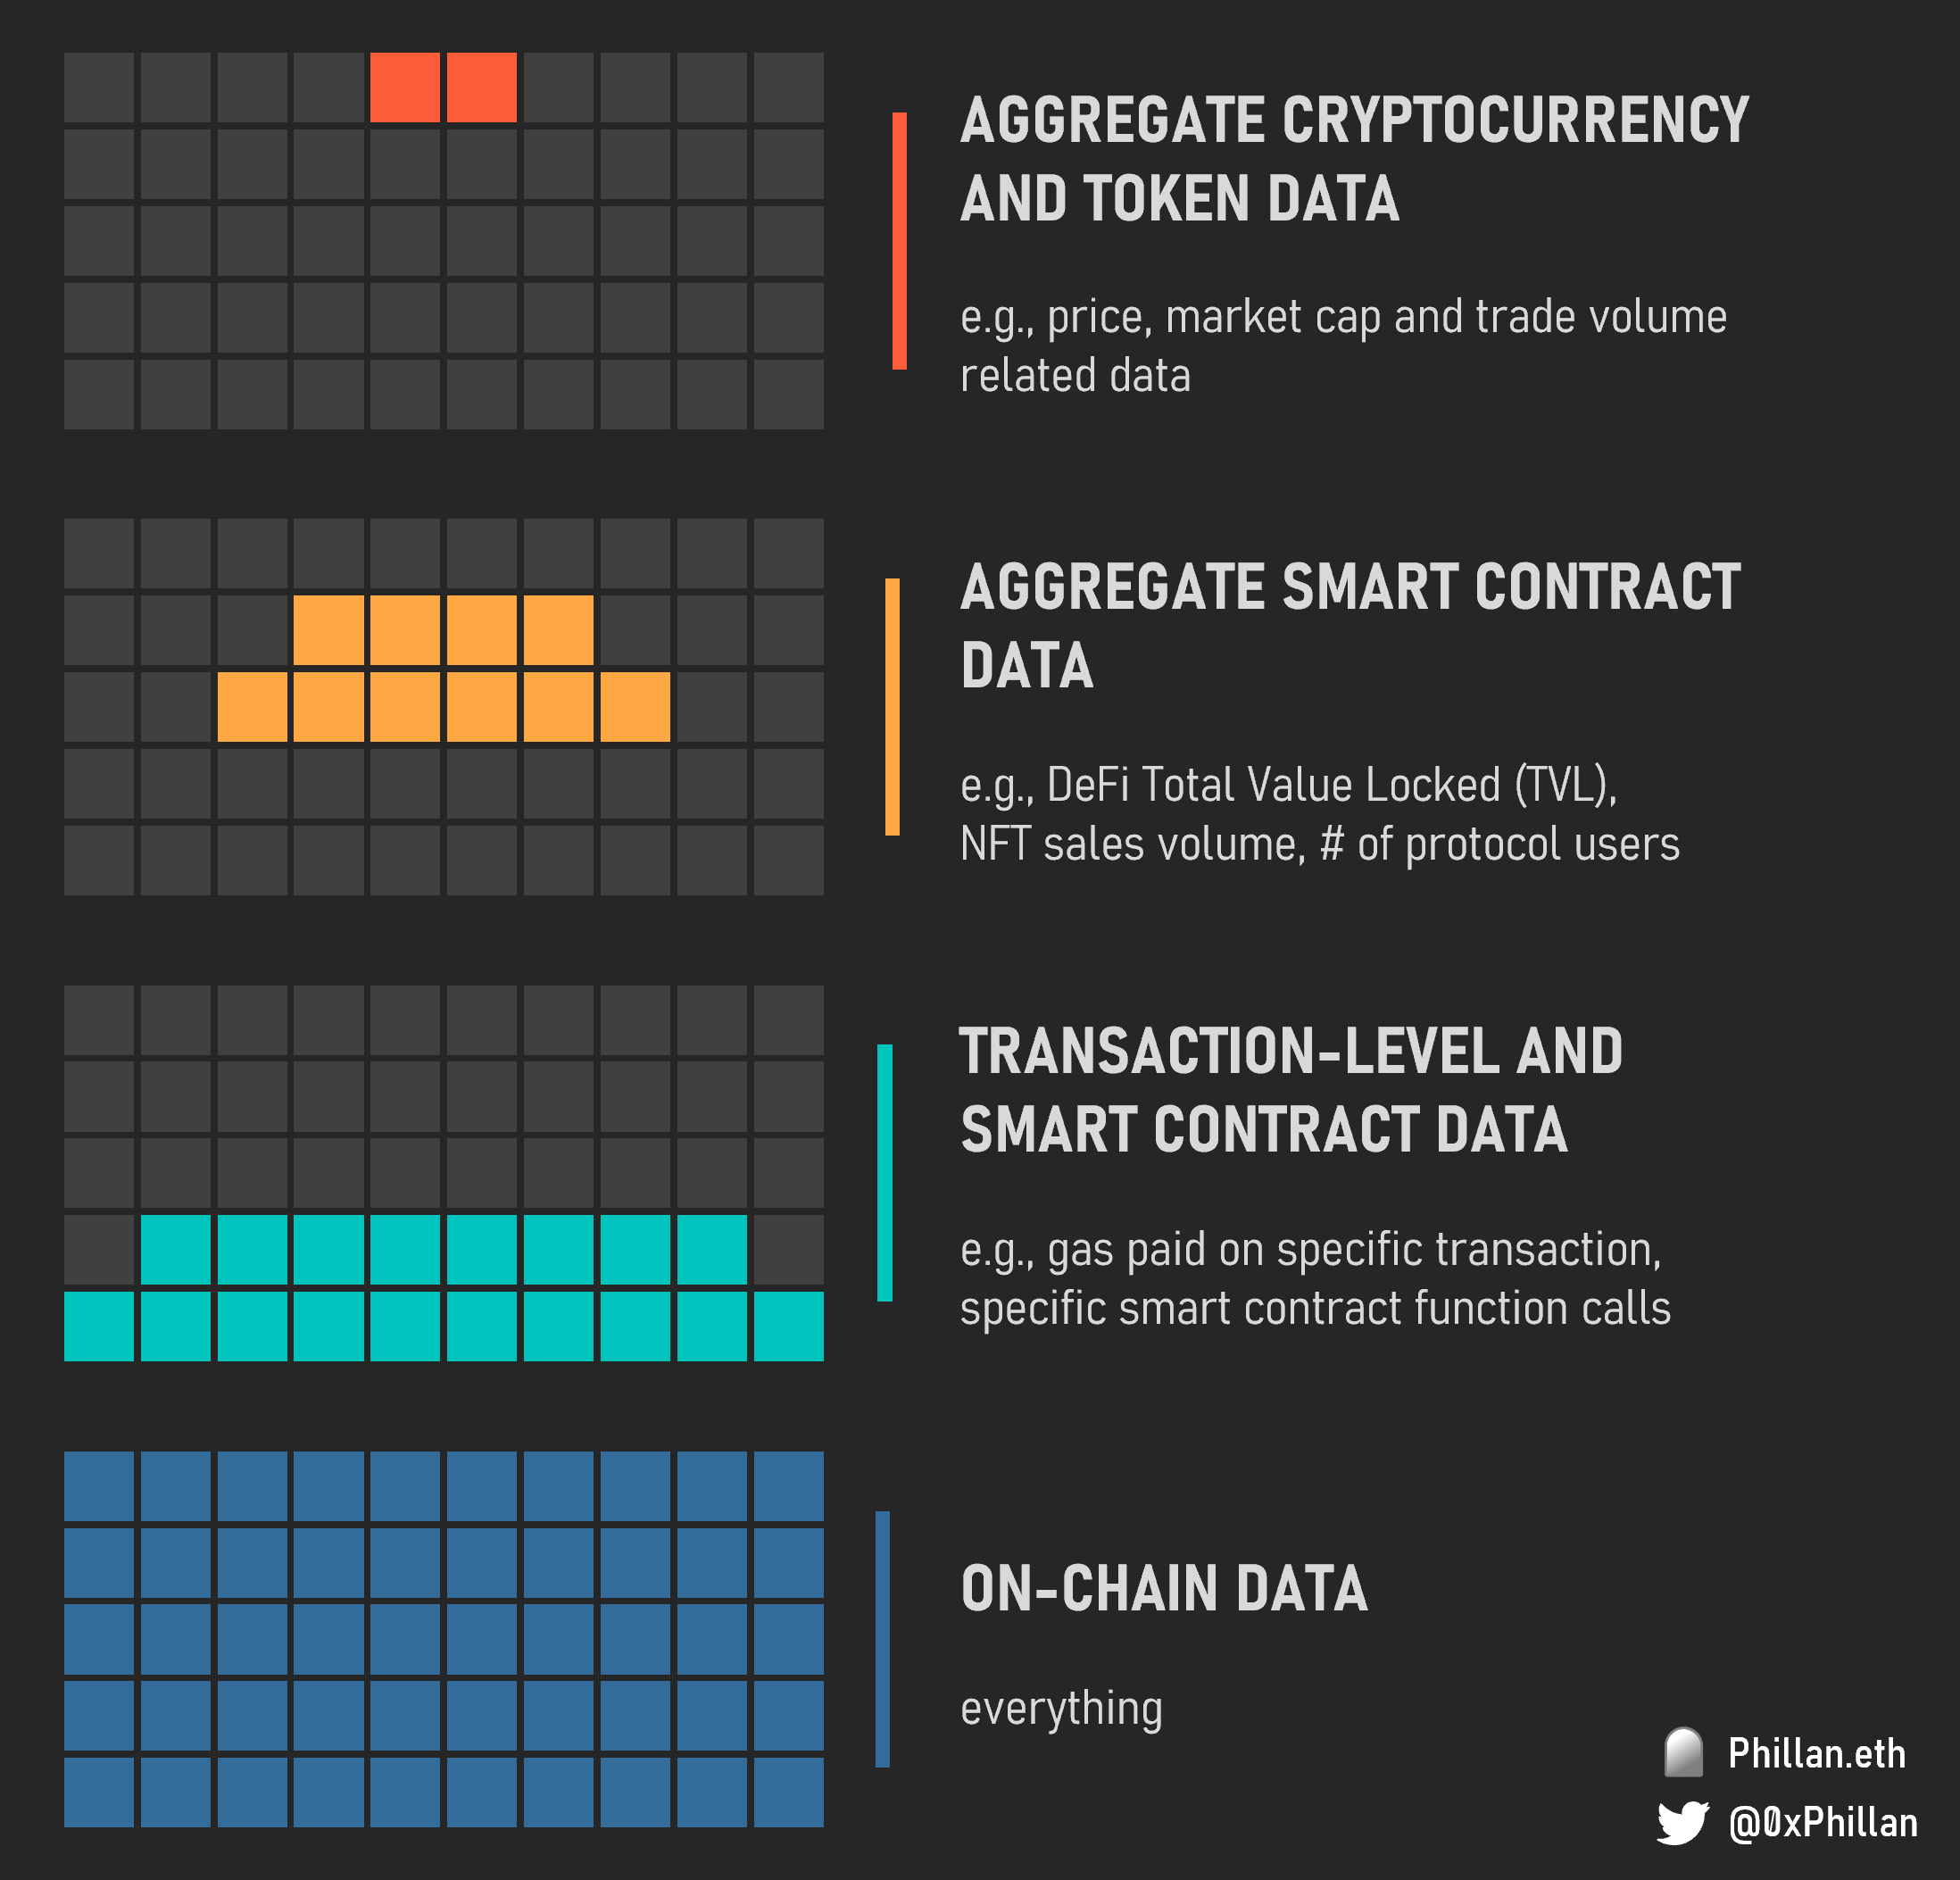 Various levels of blockchain data publicly available